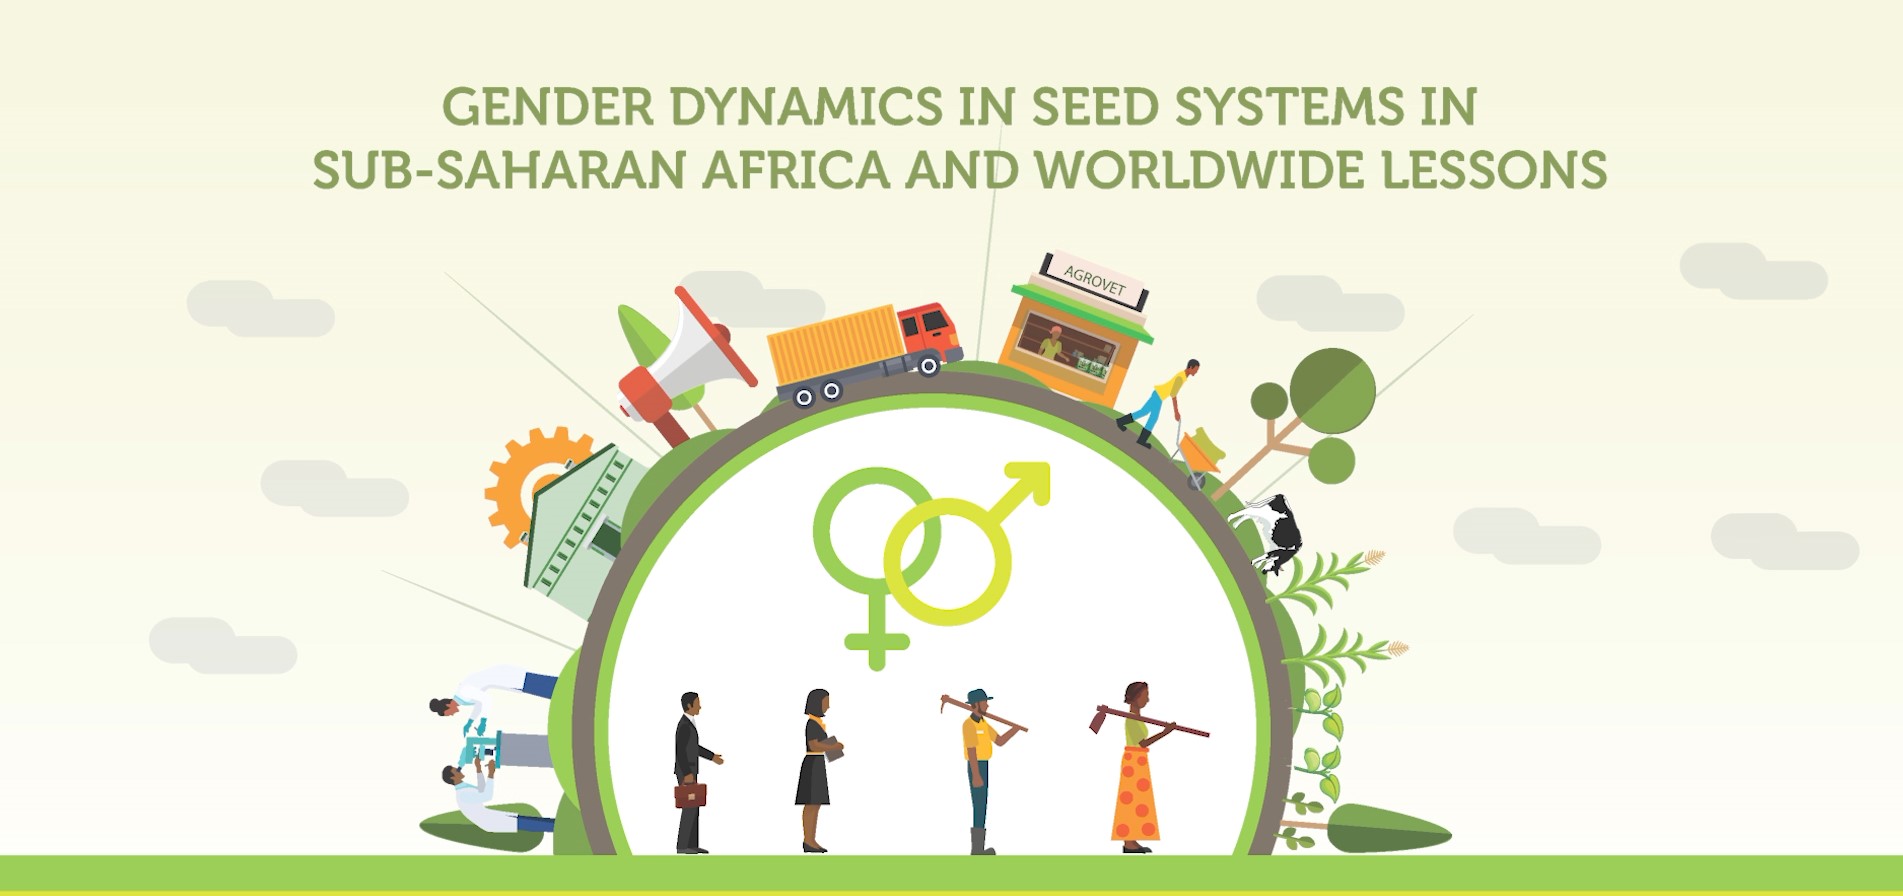 Gender Dynamics in Seed Systems in Sub-Saharan Africa and Worldwide Lessons workshop